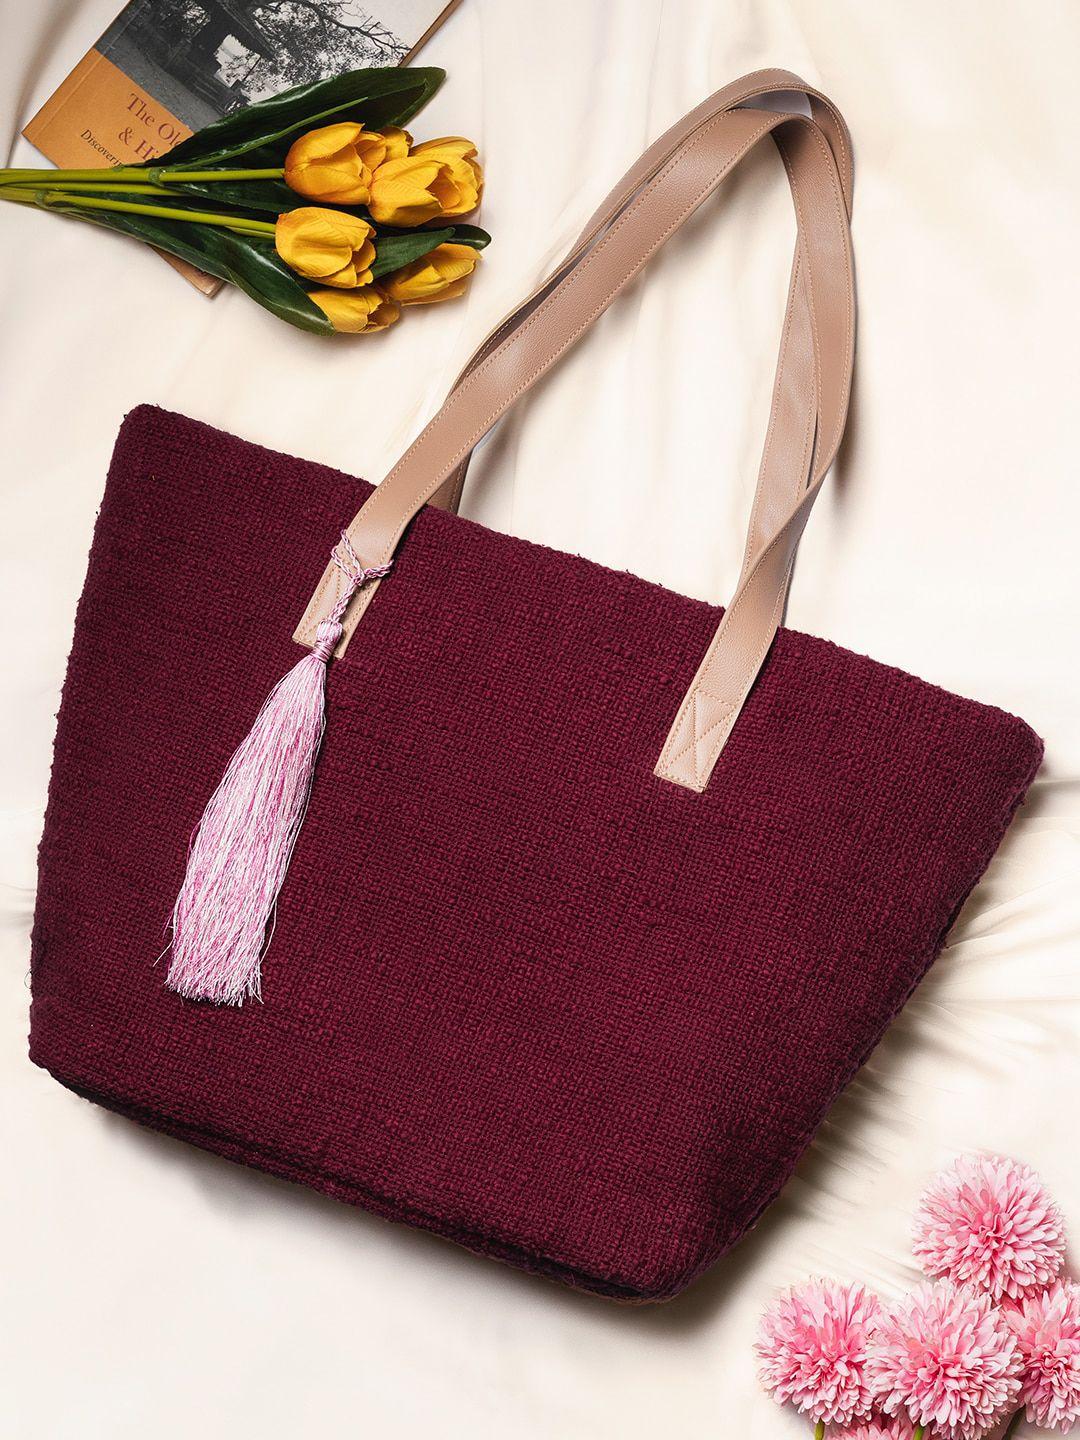 deebaco maroon structured tote bag with tasselled